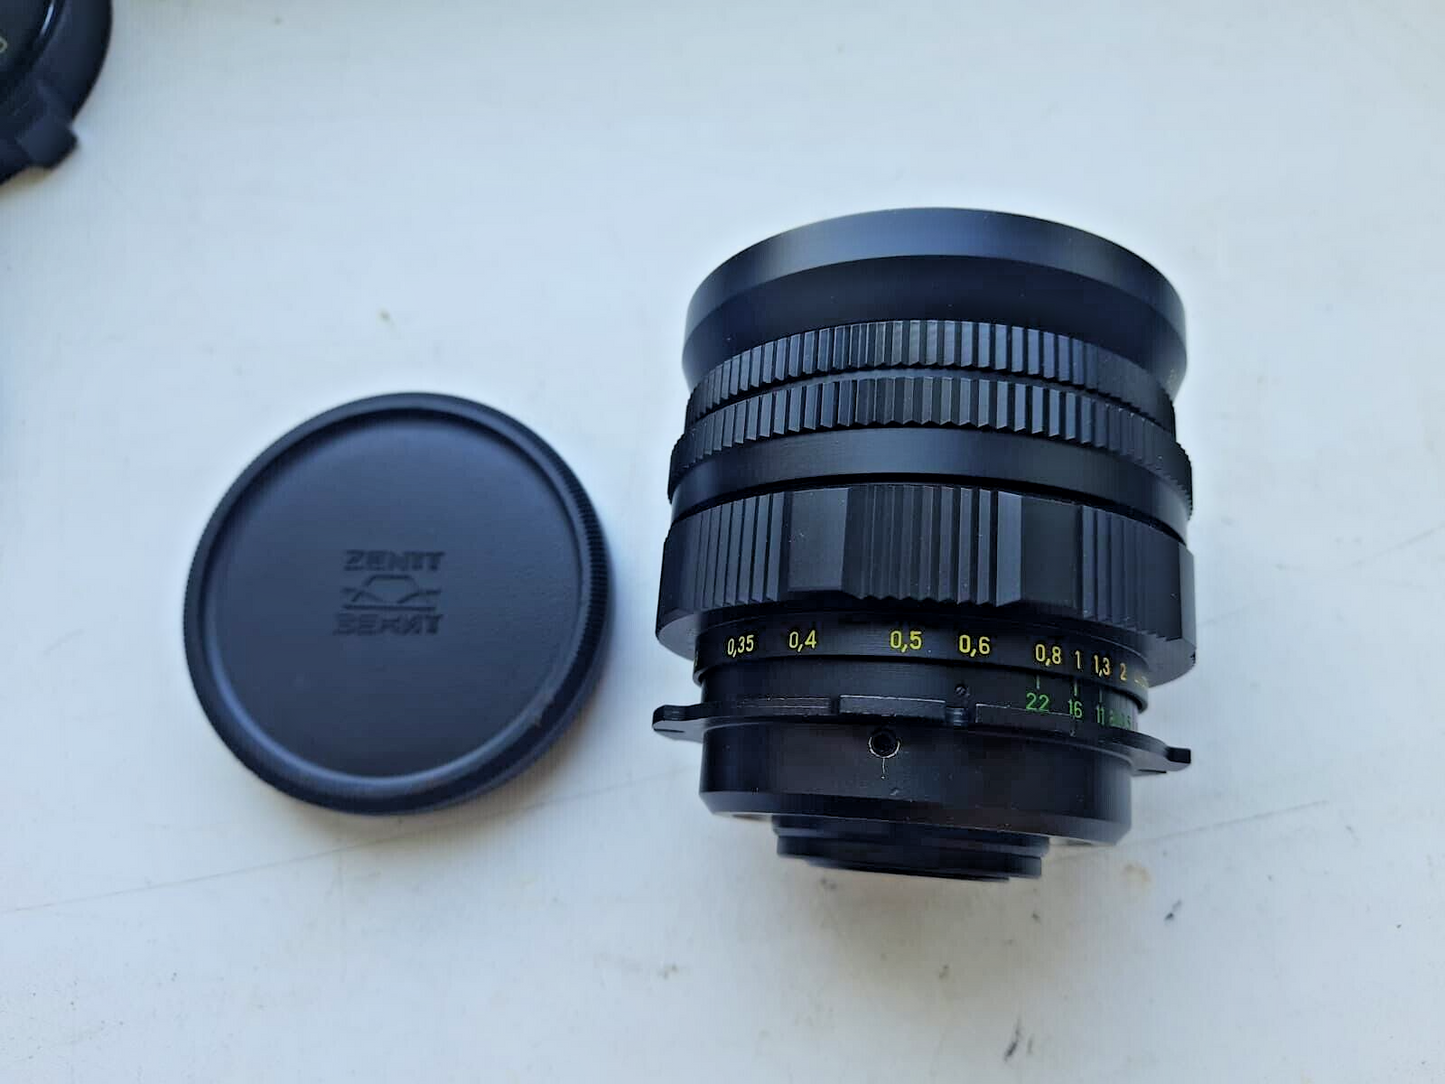 MIR-10A 28mm f/3.5 Wide angle Lens High Quality M42 or ARRI PL mount